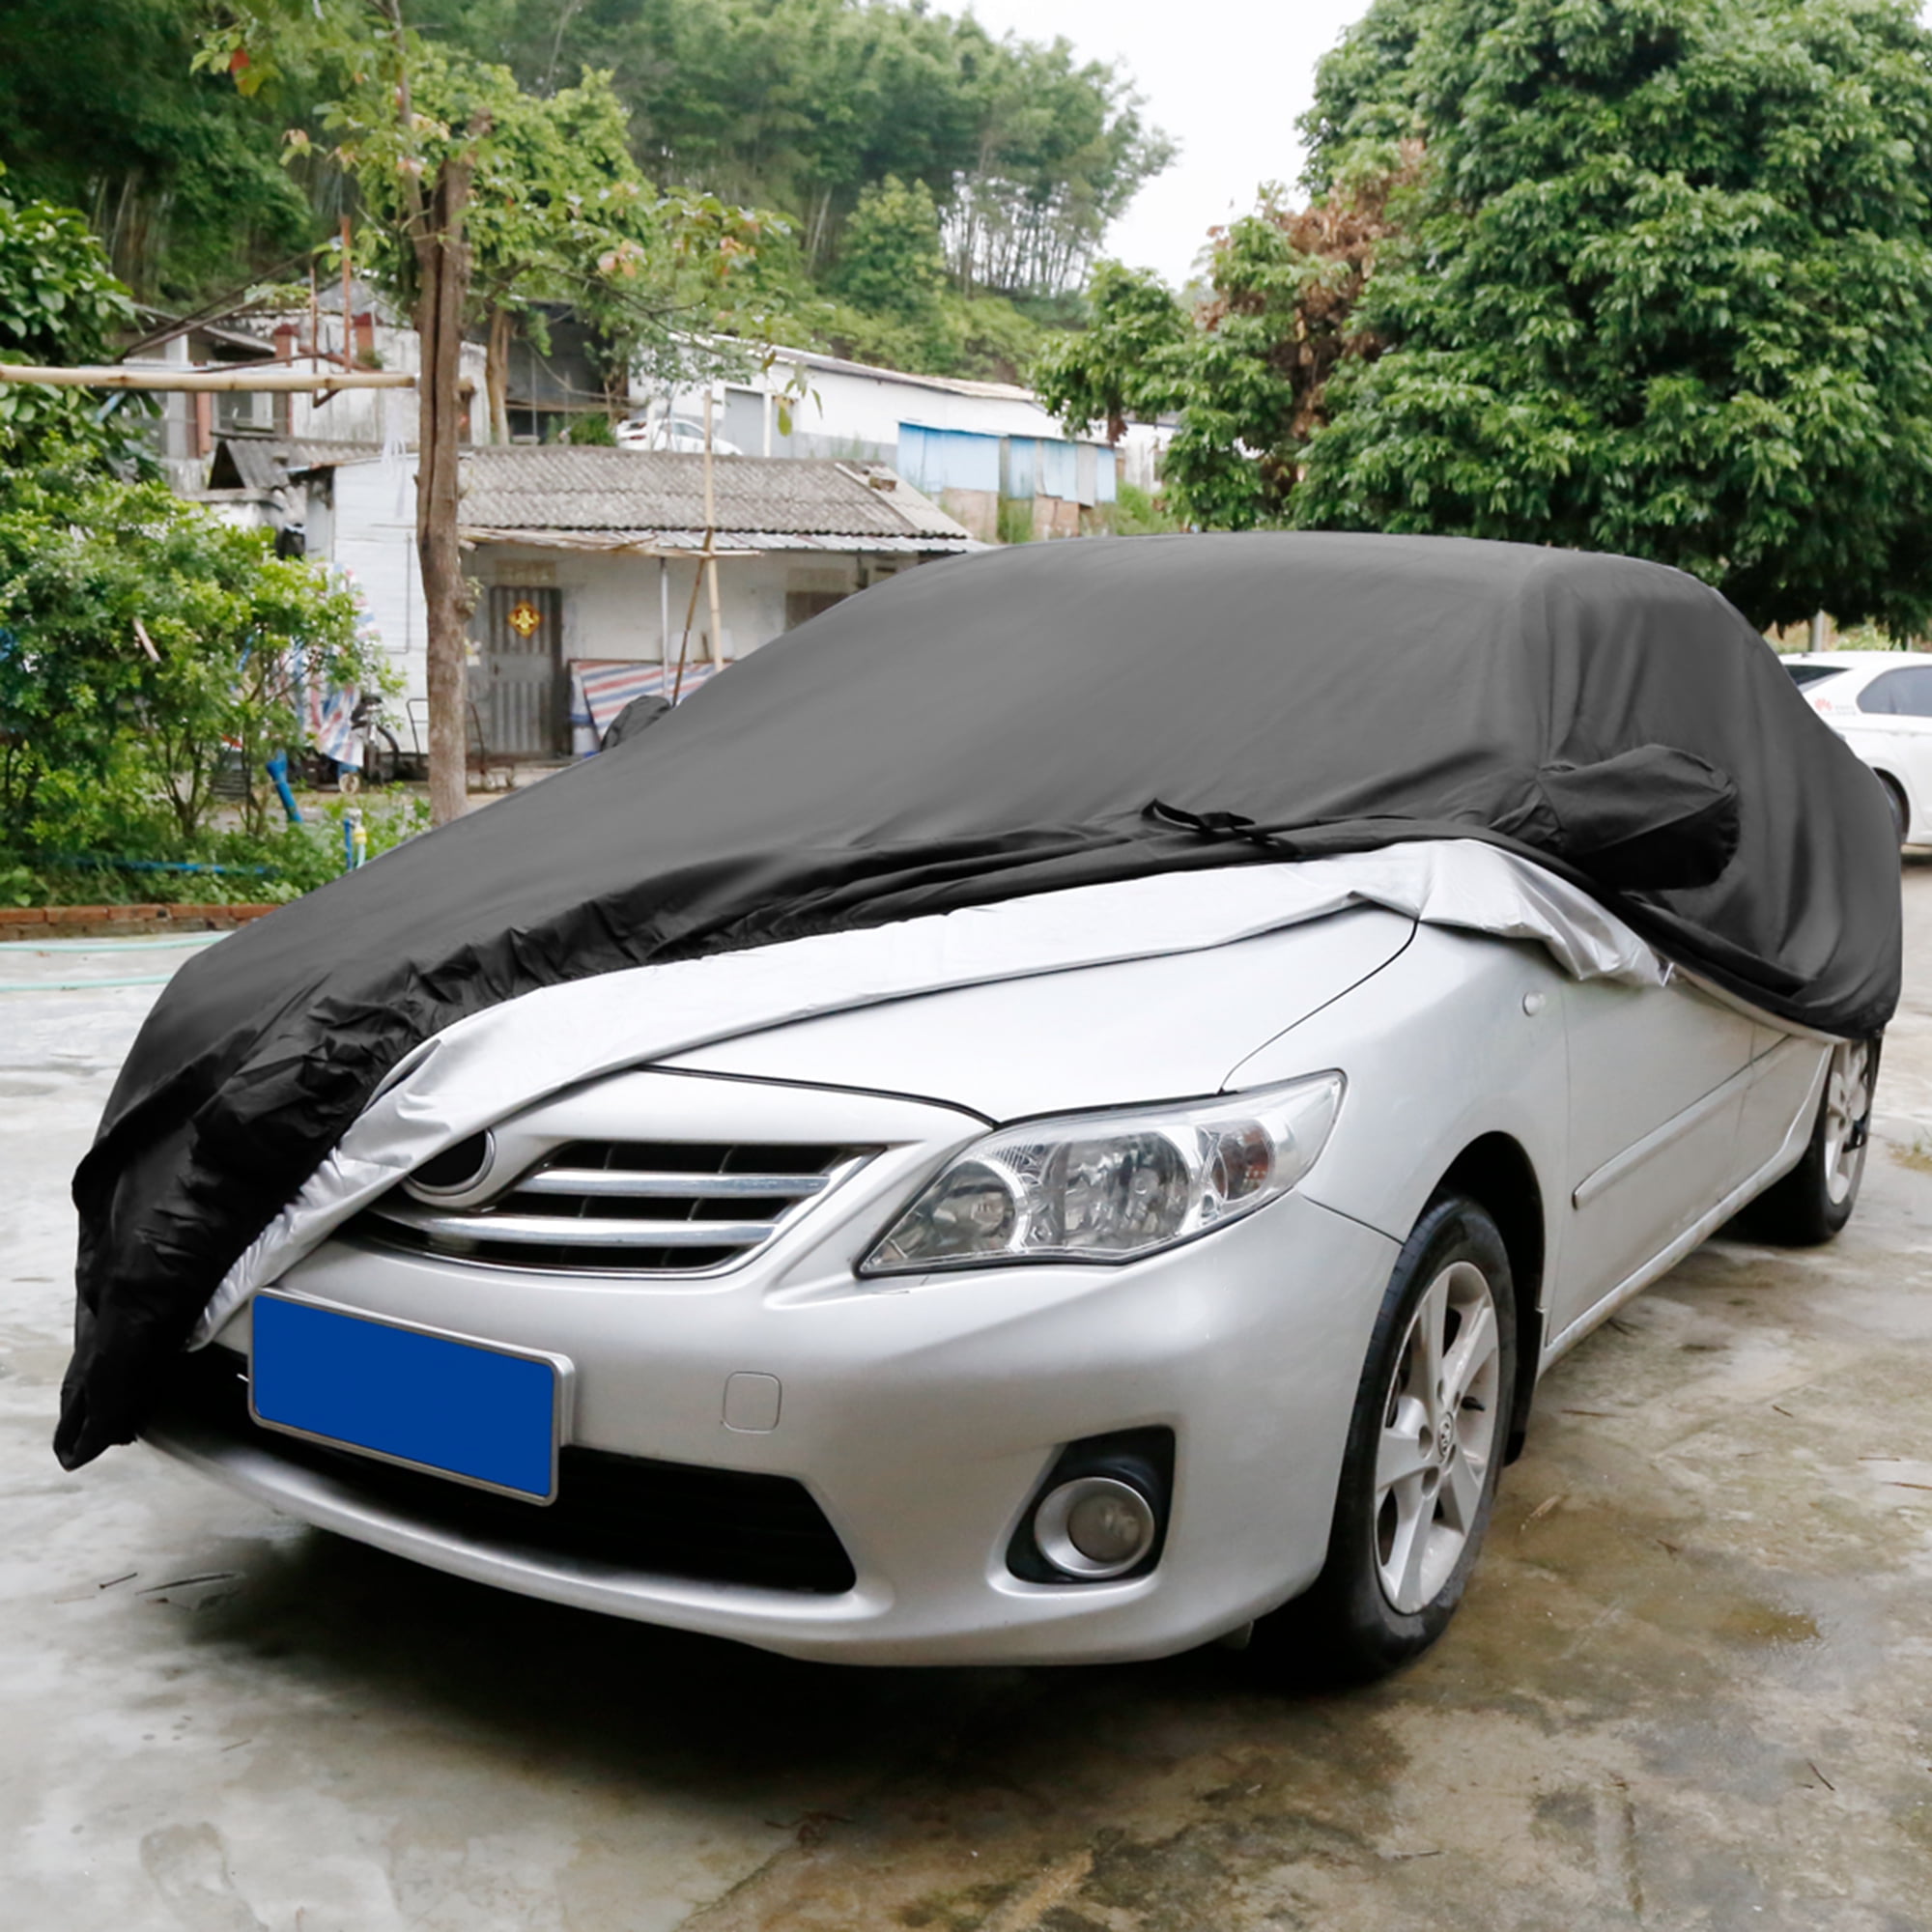 Waterproof Car Covers Replace for 2003-2009 Nissan 350Z, 6 Layers 210T  Custom-Fit Outdoor All Weather Full Car Covers with Zipper Door for Snow  Rain